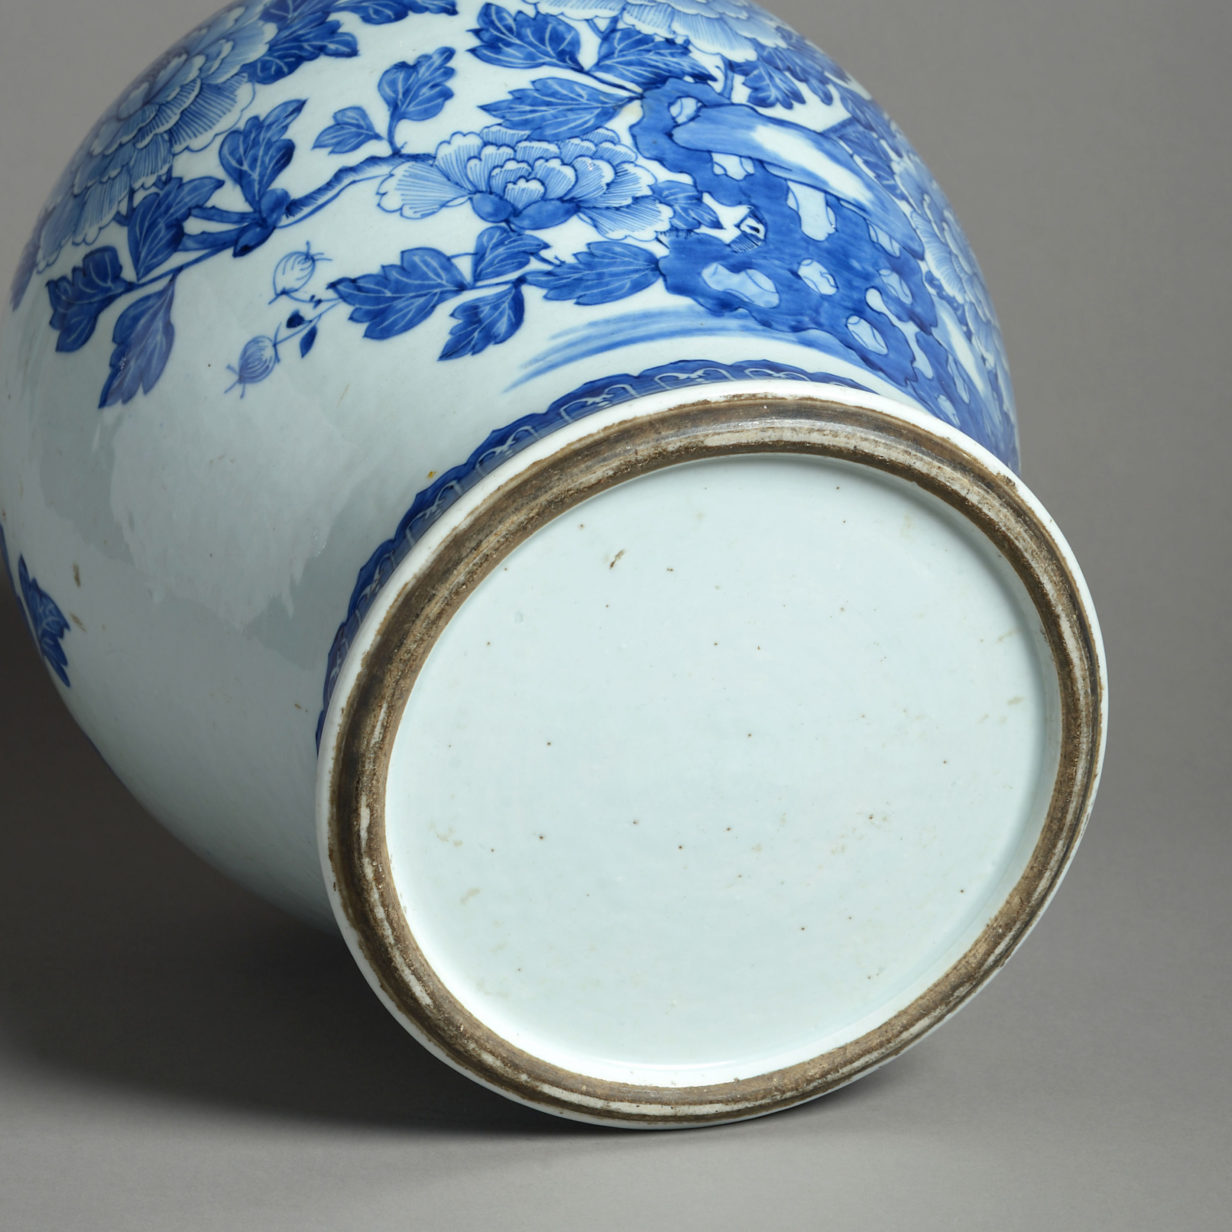 An 18th century blue & white porcelain vase and cover